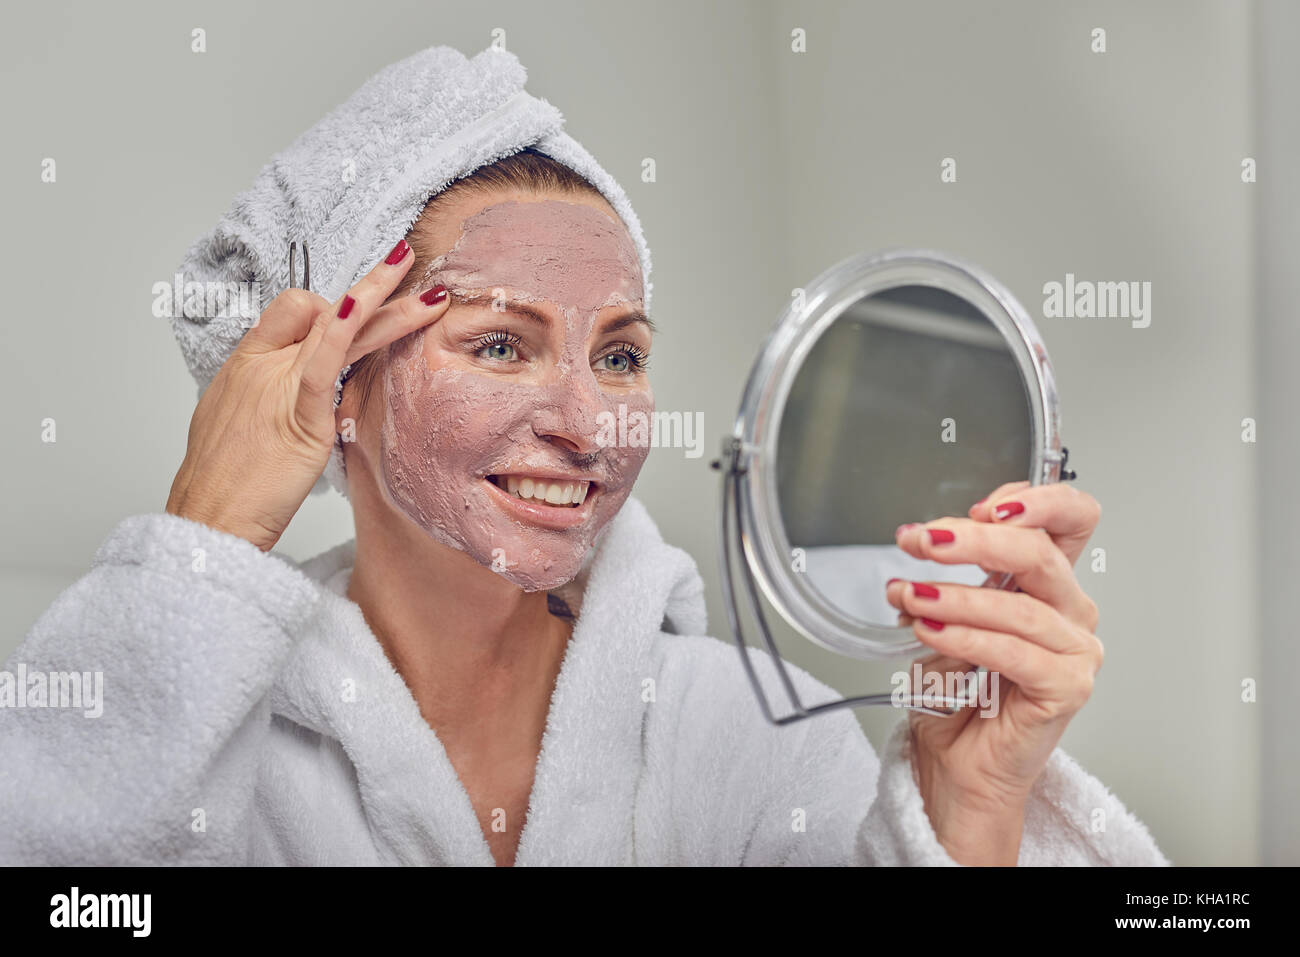 Attractive woman wearing a face mask beauty treatment holding a mirror as she plucks her eyebrows with tweezers Stock Photo